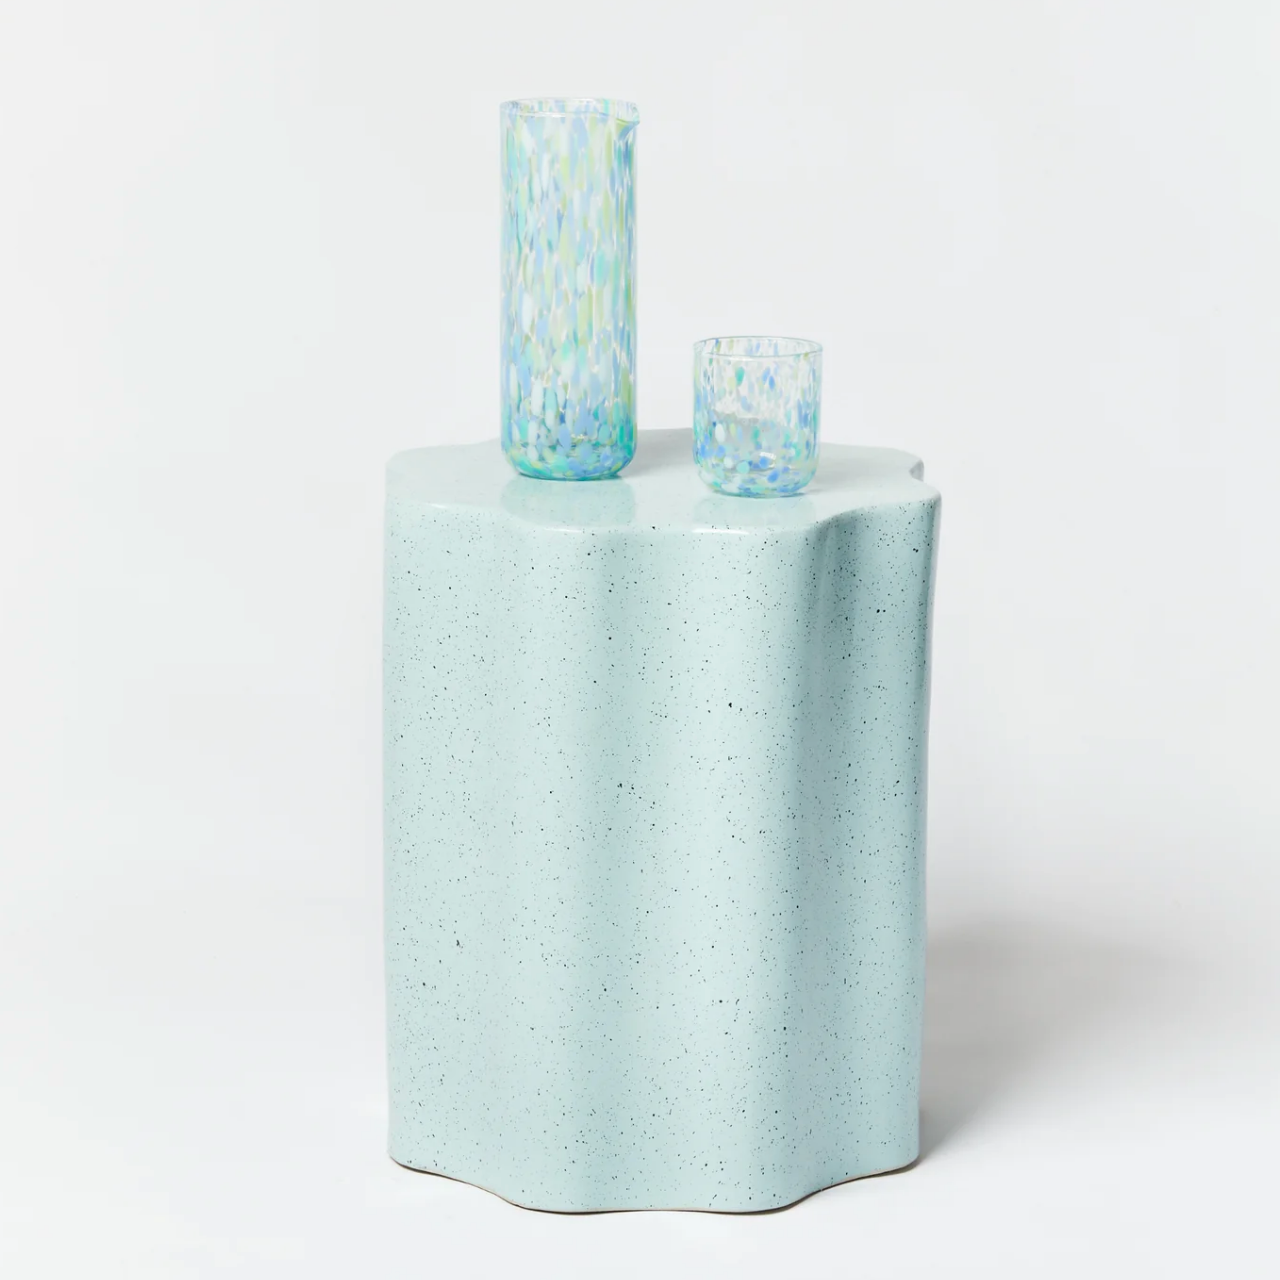 BONNIE AND NEIL WAVE SIDE TABLE: SPECKLE SOFT BLUE